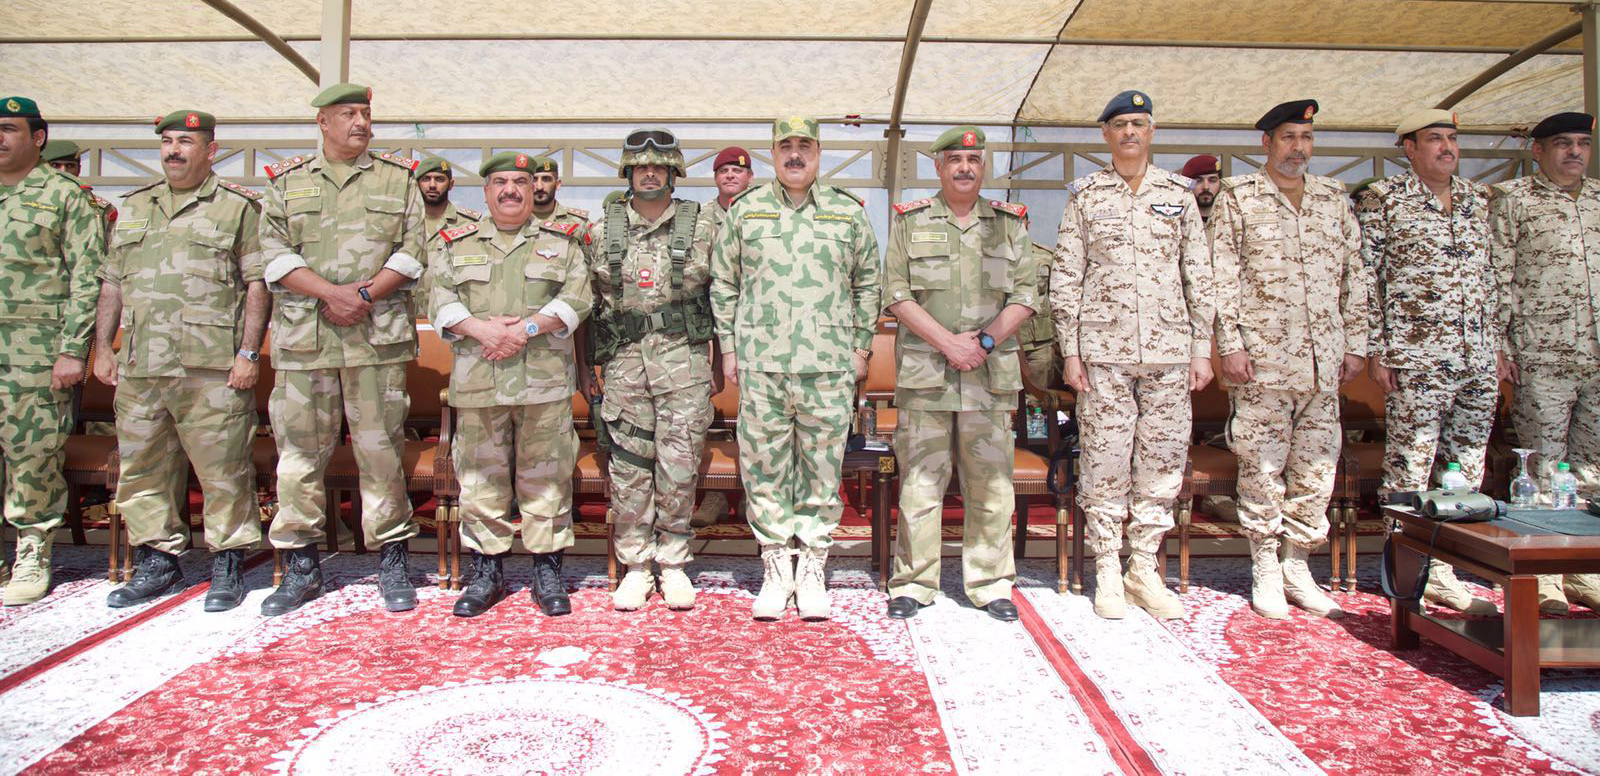 The joint training of Kuwaiti and Bahraini national guards known as "Exercise 2"